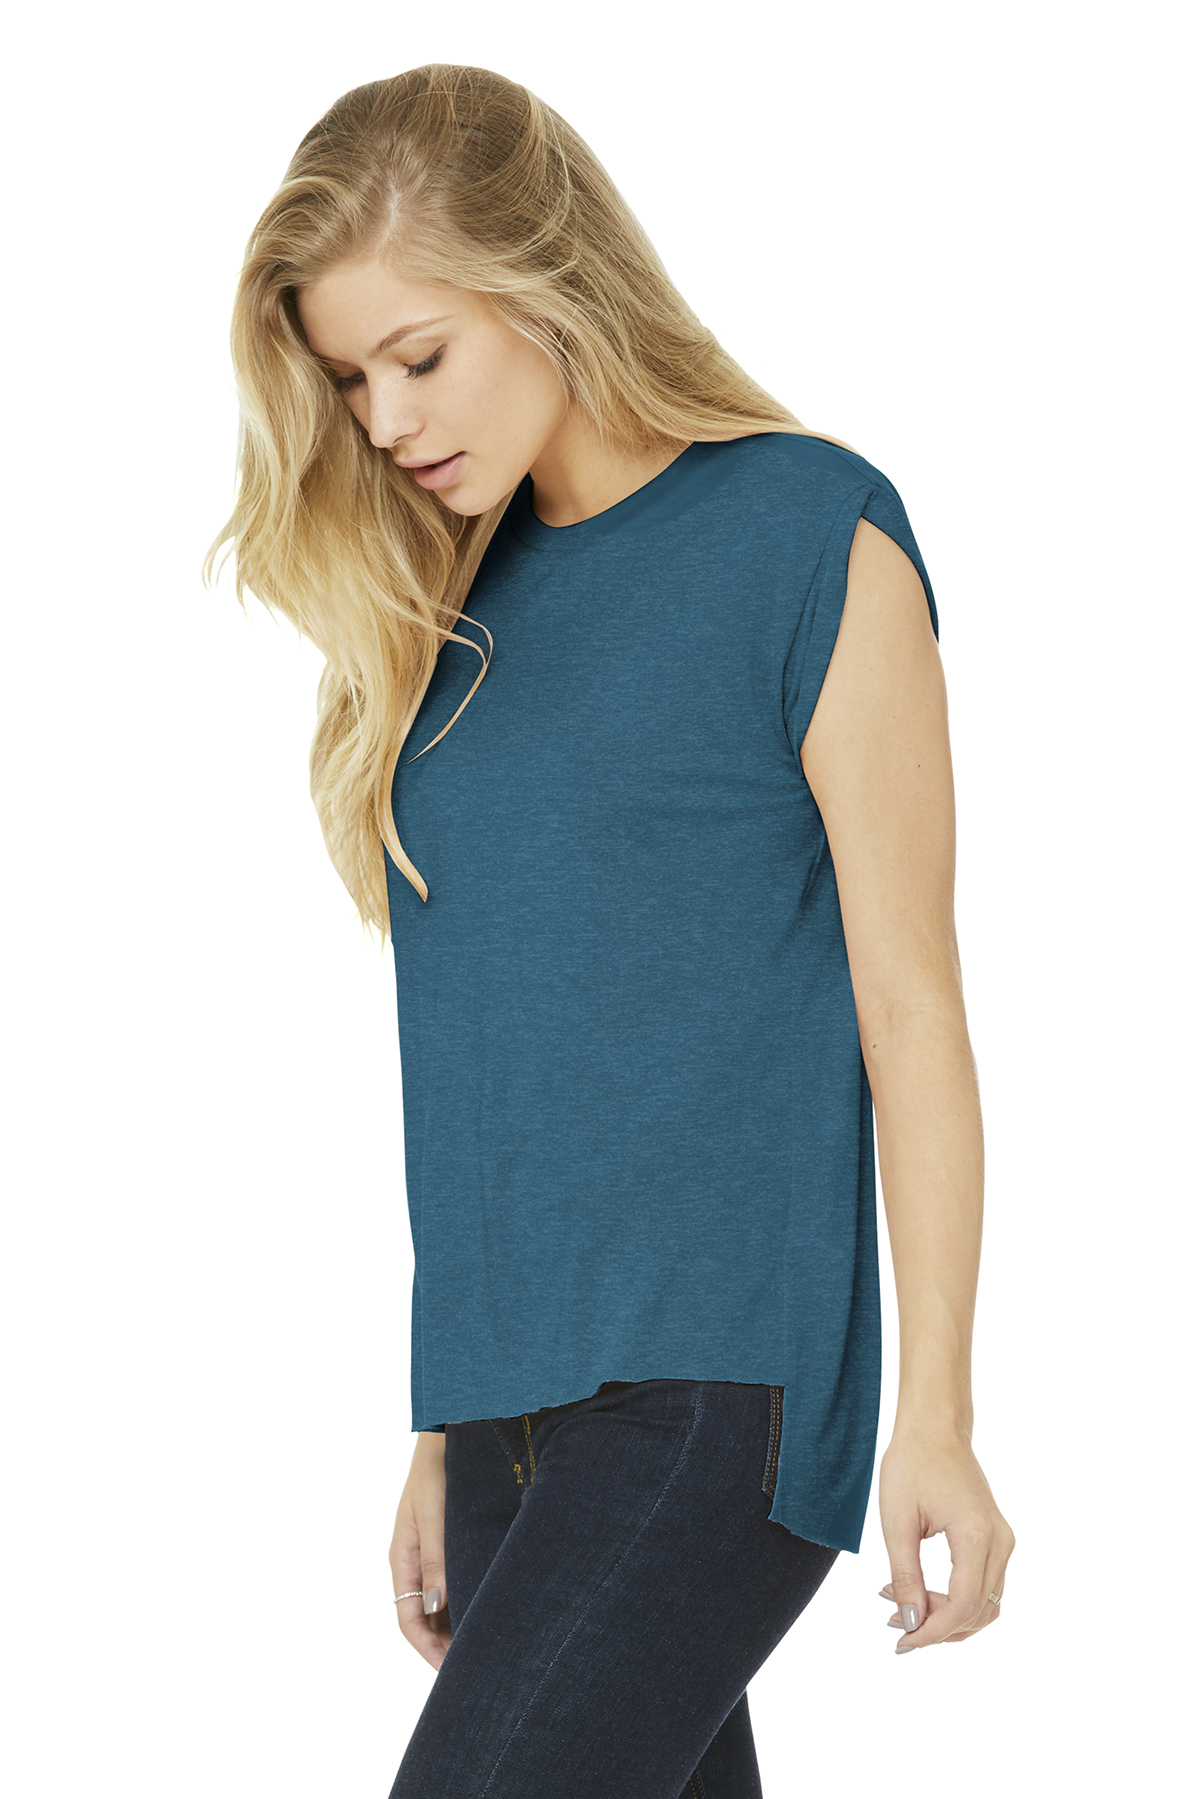 BELLA+CANVAS Women’s Flowy Muscle Tee With Rolled Cuffs | Product | SanMar